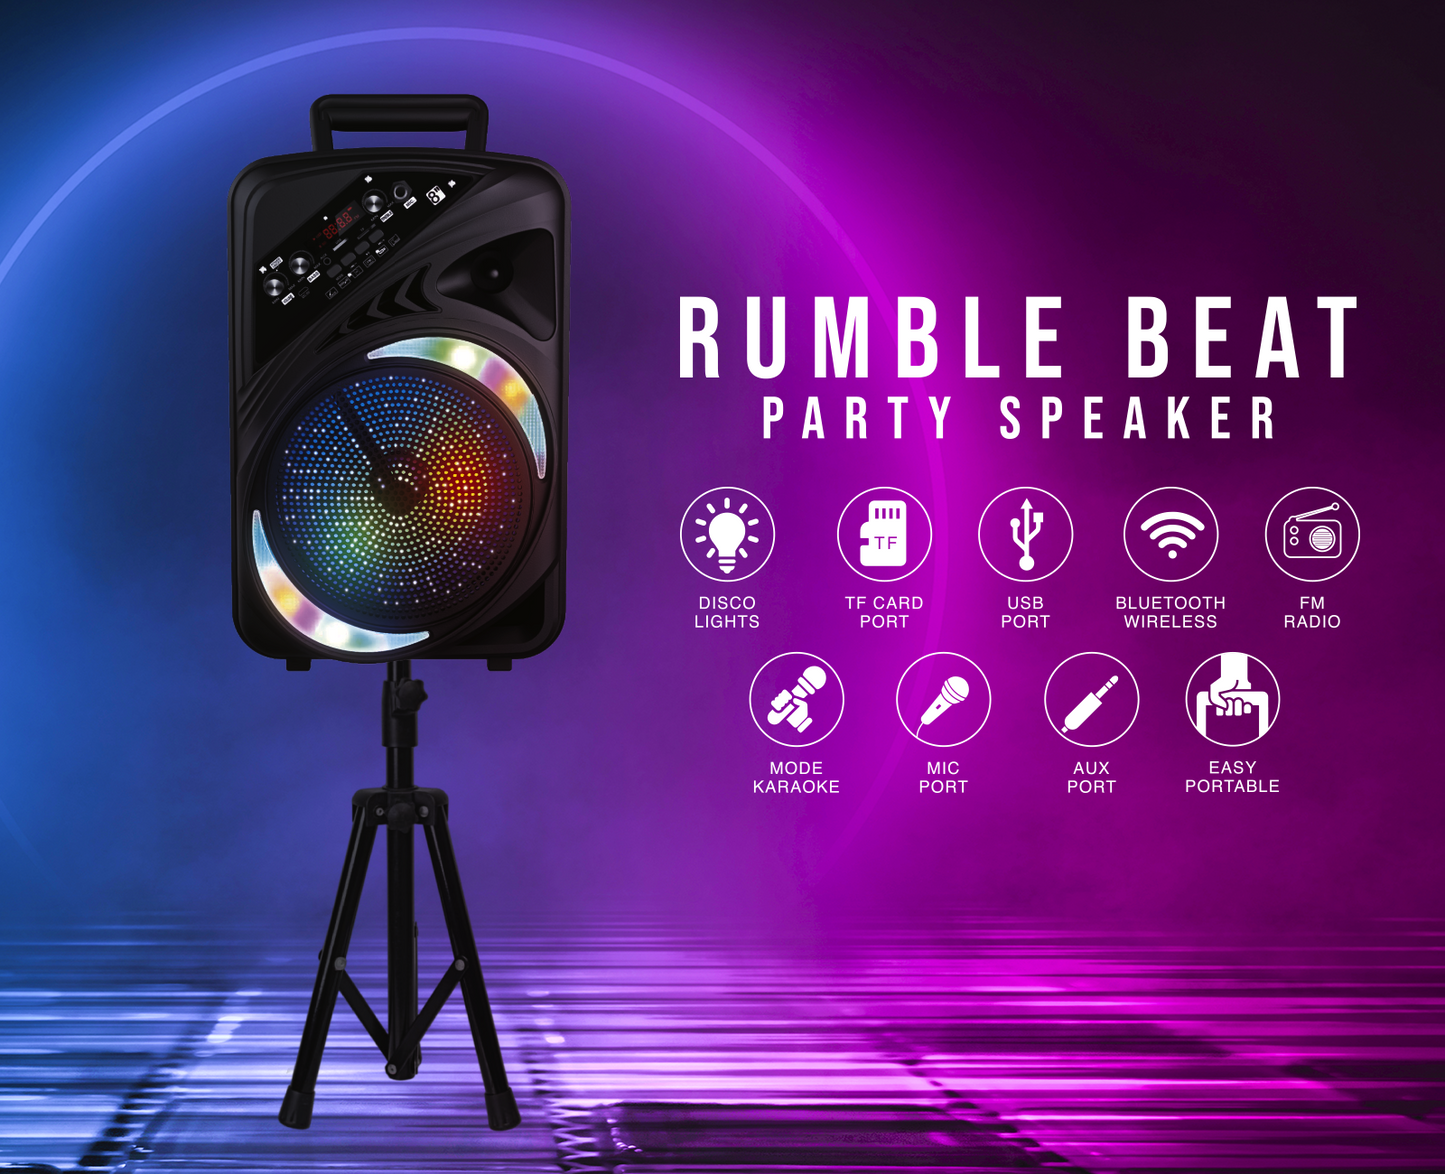 TOPTECH AL-8 Rumble Beat, 8 Inch Bluetooth Speakers with Disco Lights, Wireless Stereo Sound with Wireless Microphone，Up to 10 Meters (33ft) Bluetooth Distance,Crystal Clear Sound with stand, Rechargeable Long Battery Life for Party Outdoor Camping